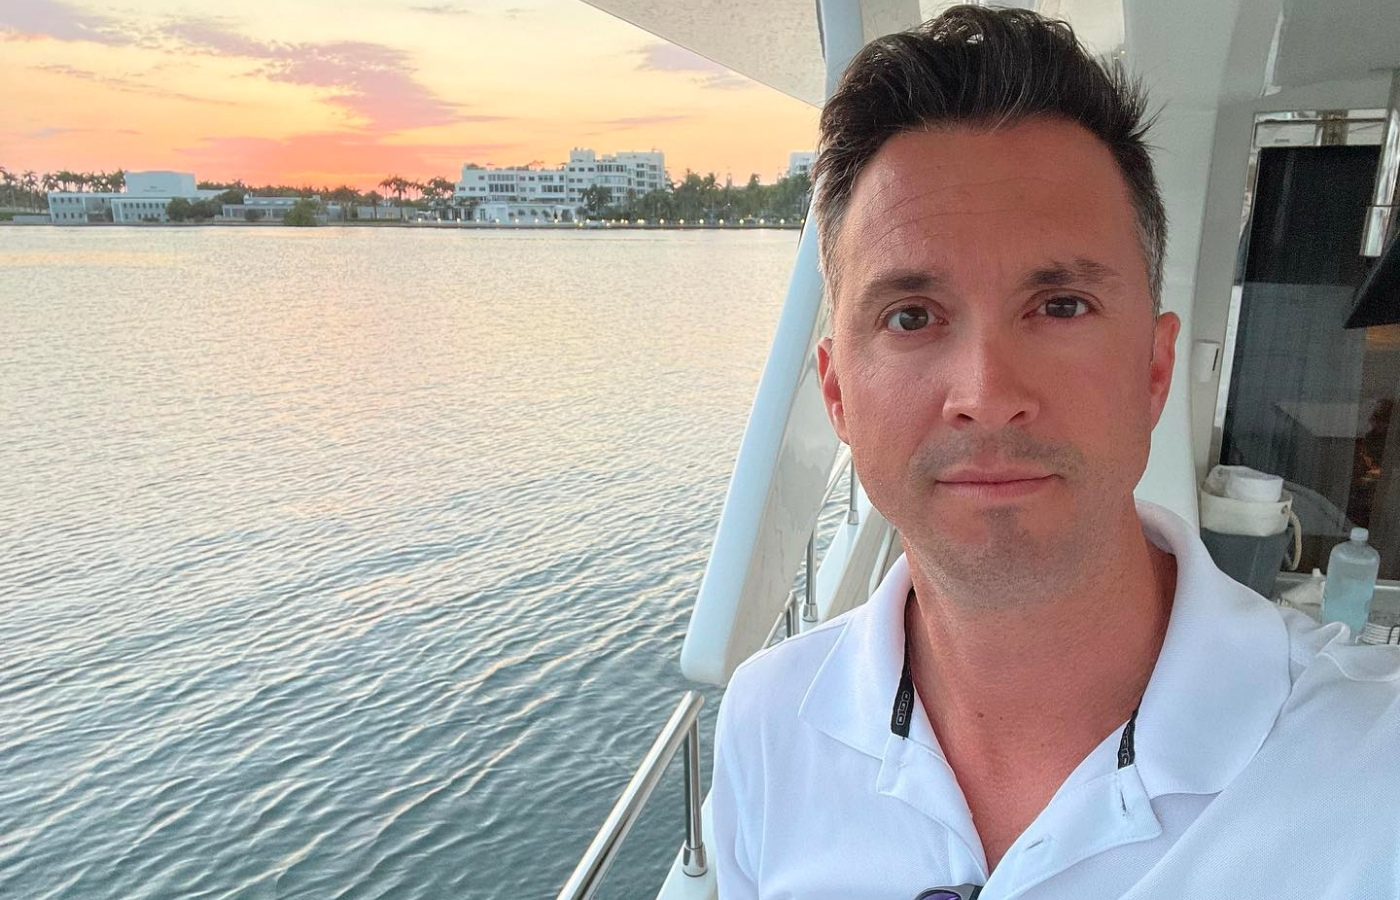 What Is Bobby Giancola From Below Deck Med Doing Today? [In the News]